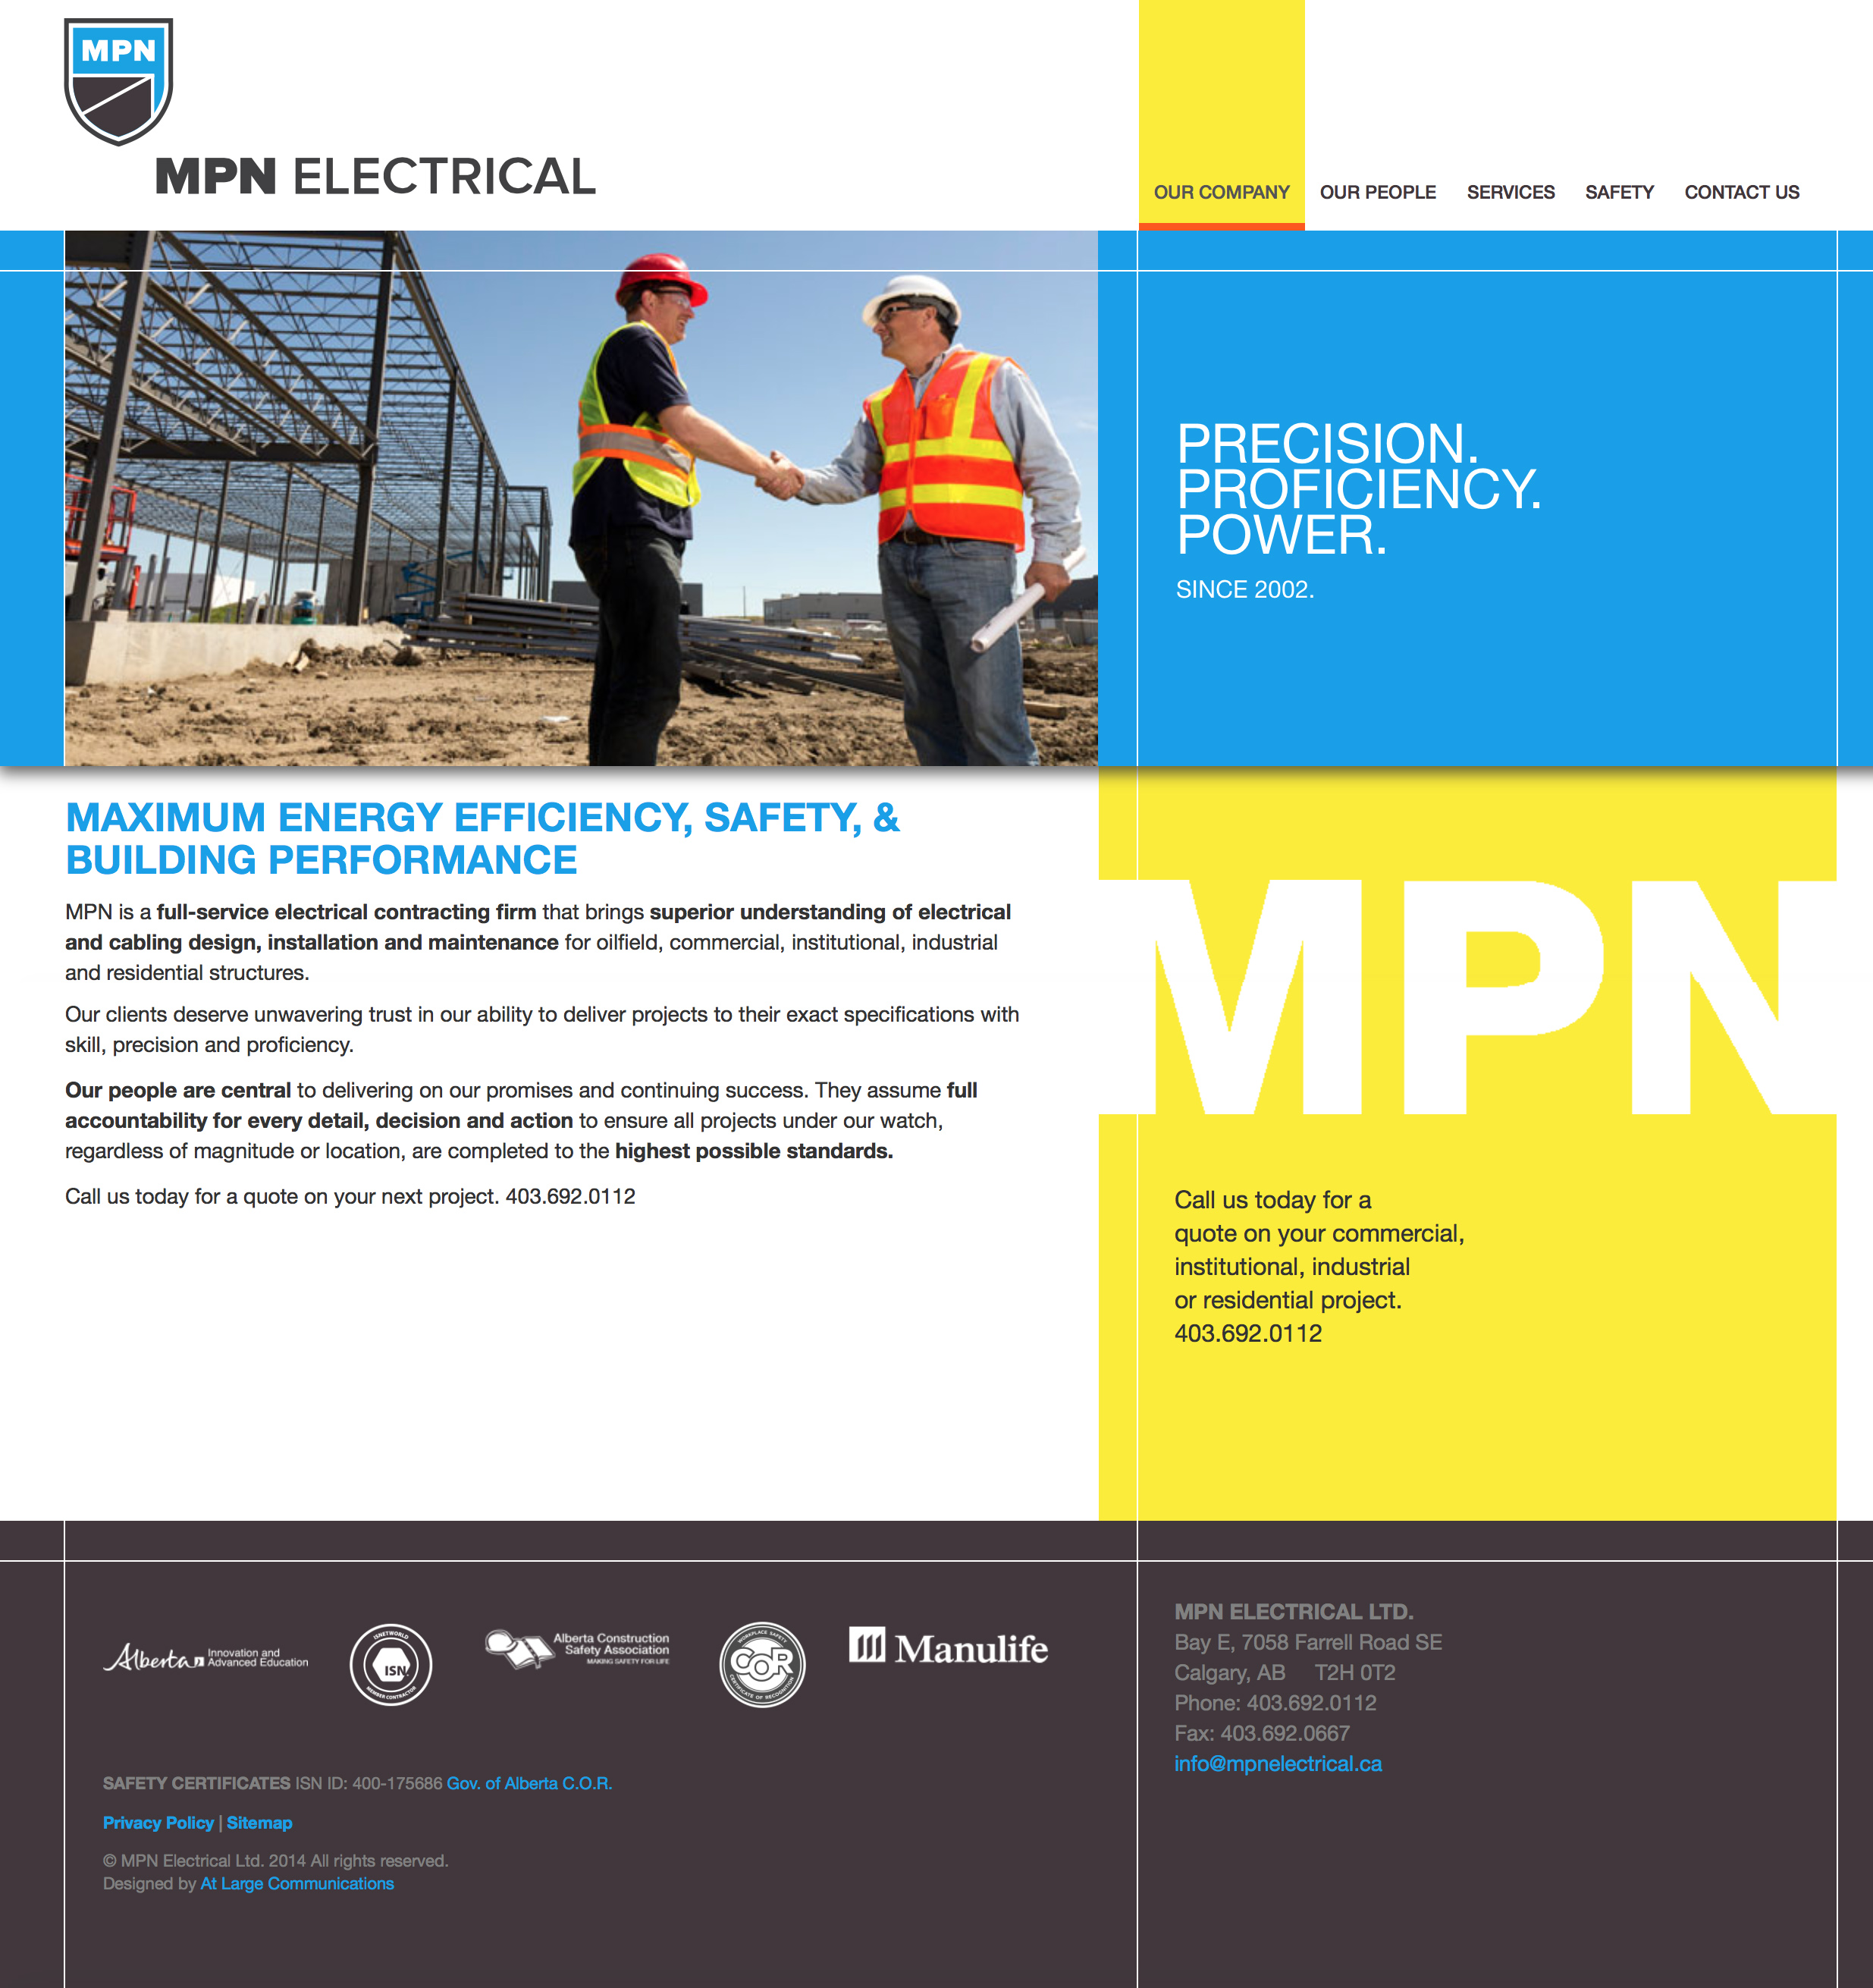 Part of the strategy, marketing & communications team for MPN Electrical